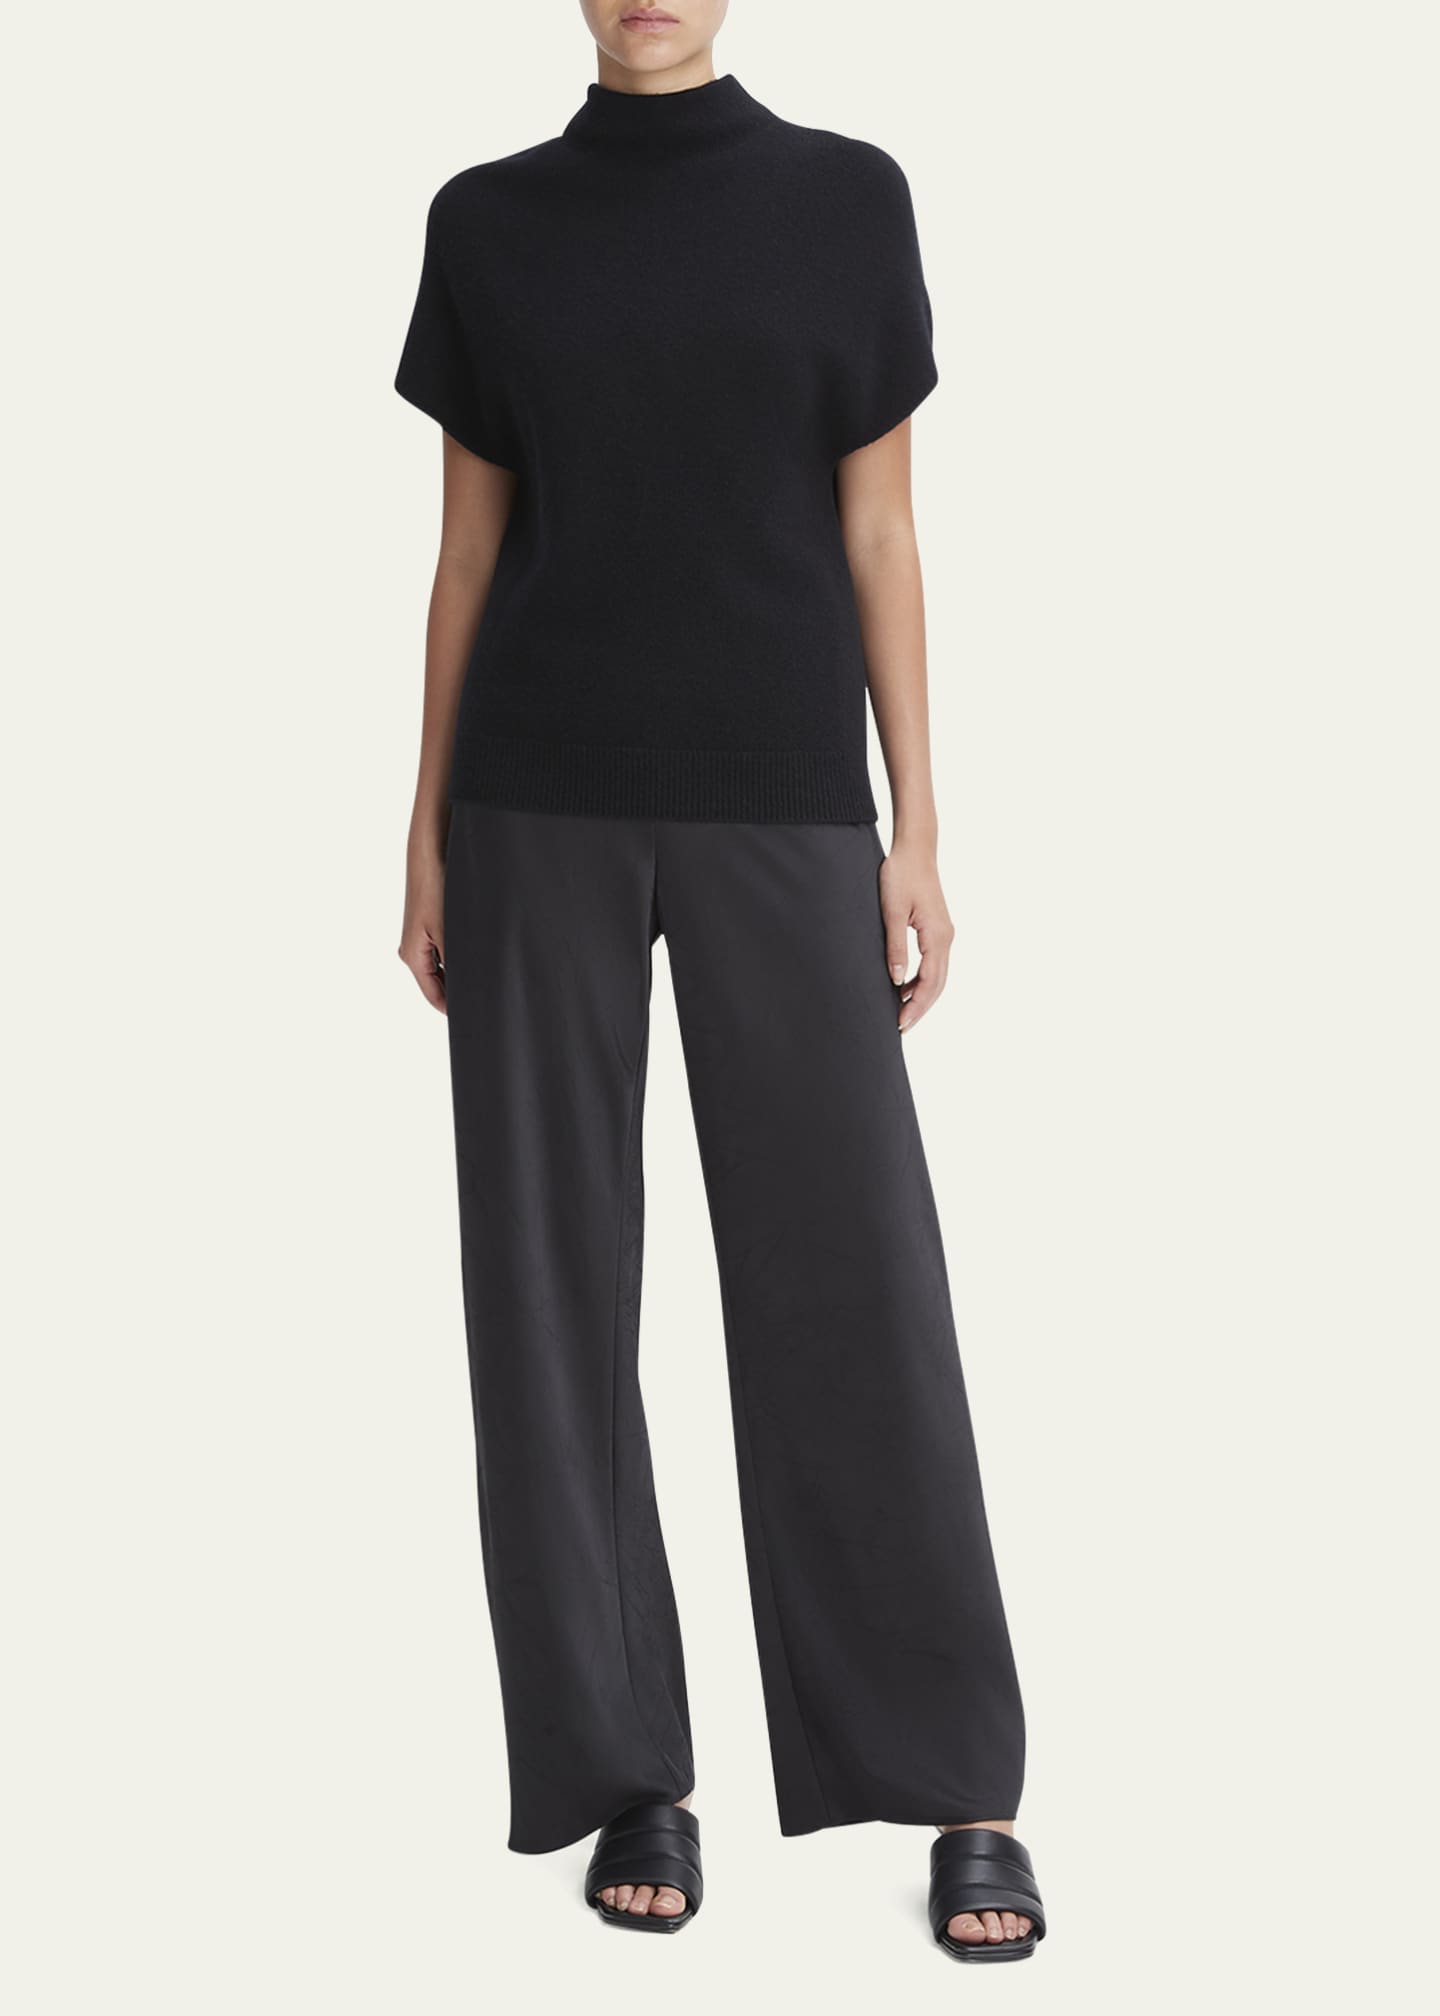 Vince Wool and Cashmere Short-Sleeve Mock-Neck Sweater - Bergdorf Goodman